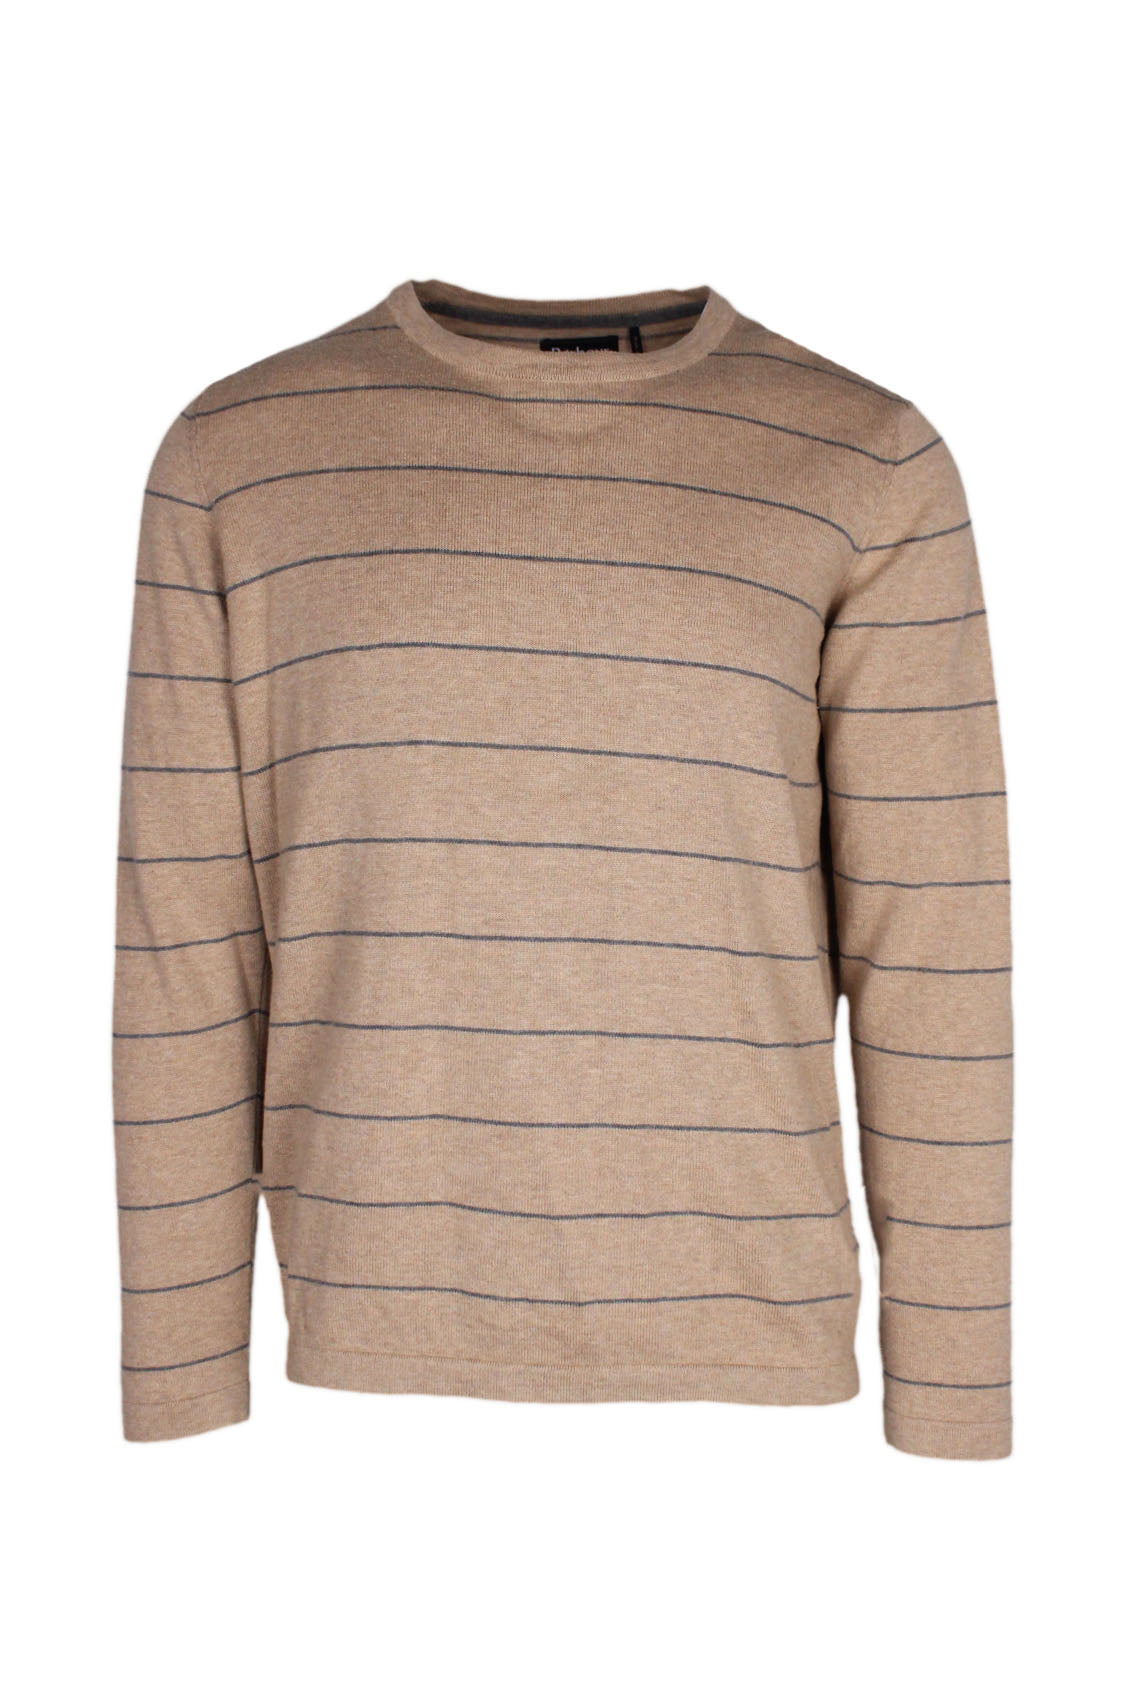 front view of barbour beige/grey pullover cotton/cashmere blend sweater. features striped pattern throughout, ‘barbour’ logo tab at left side above hem, and ribbed collar/cuffs/hem.